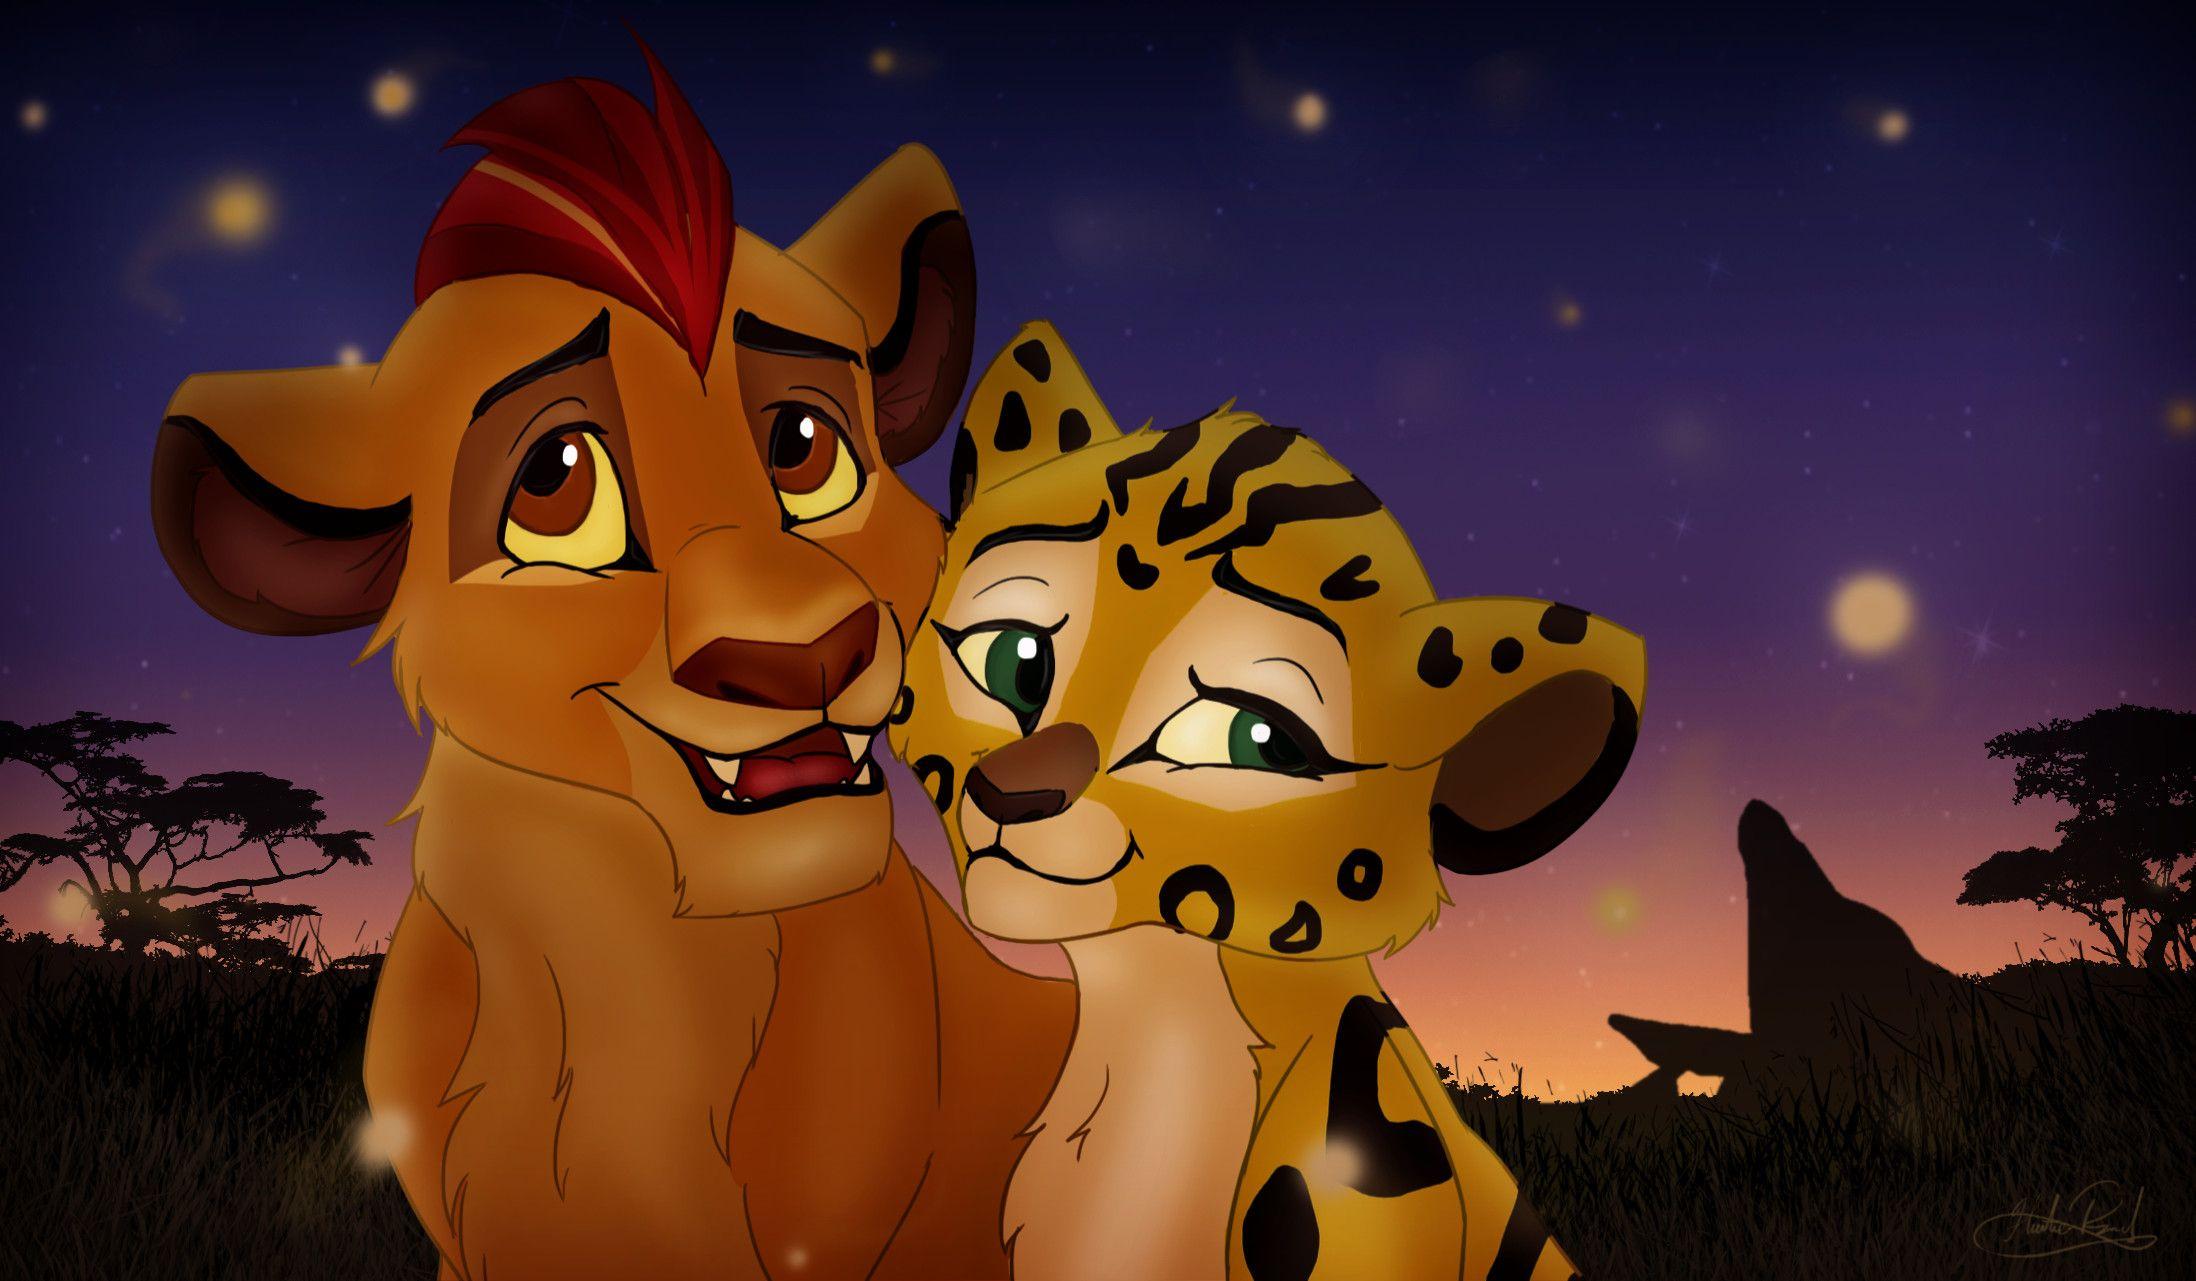 The Lion King Wallpaper Lovely Kion and Fuli the Lion Guard Fireflys